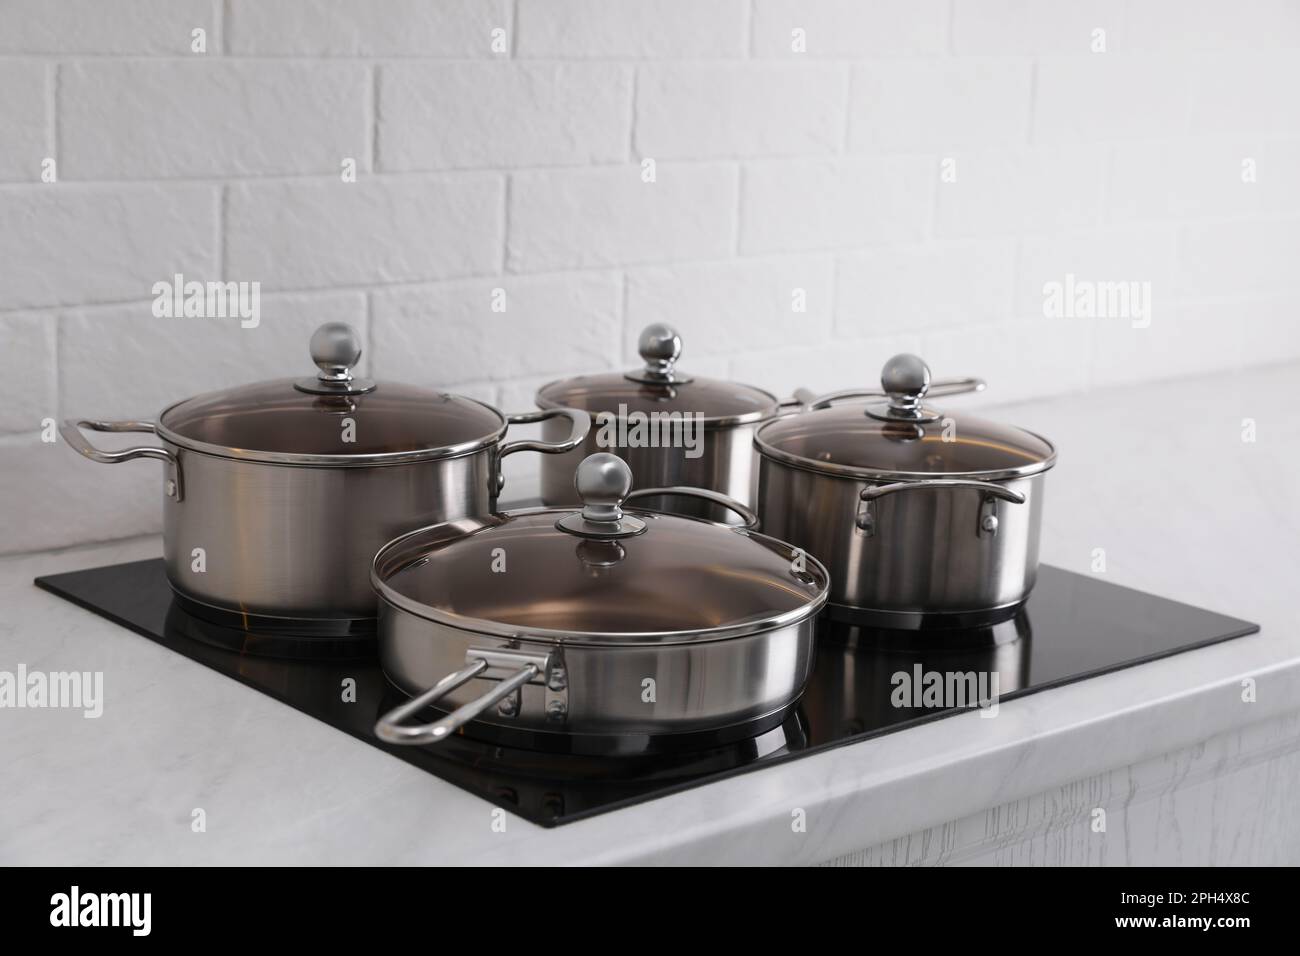 https://c8.alamy.com/comp/2PH4X8C/set-of-new-clean-cookware-on-cooktop-in-kitchen-2PH4X8C.jpg